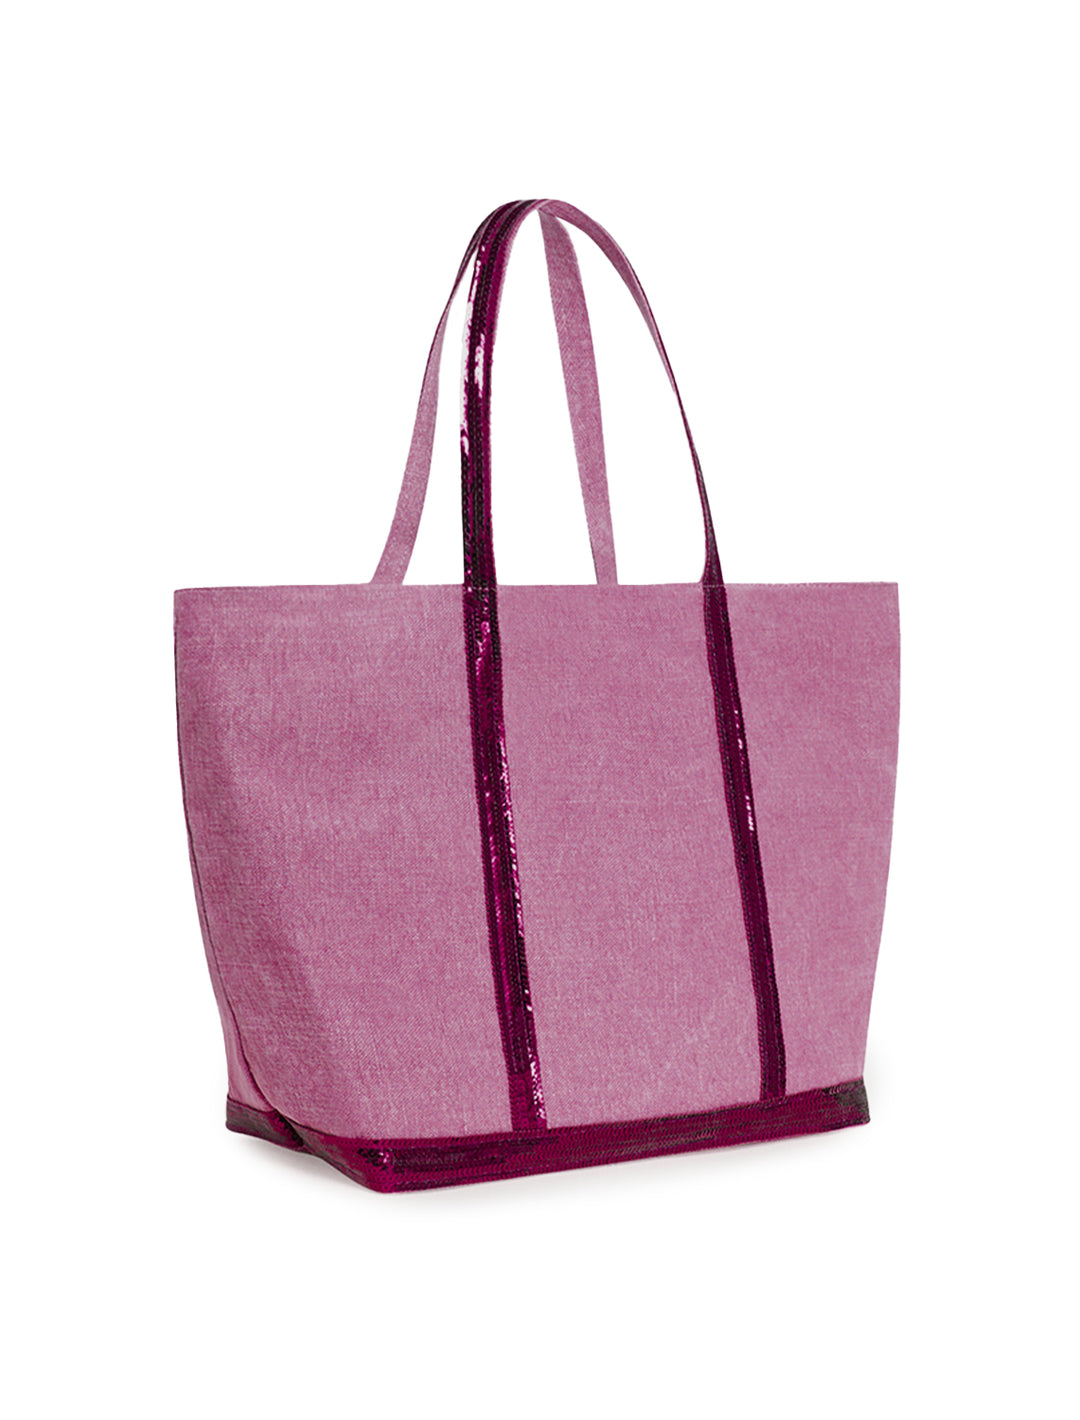 Front angle view of Vanessa Bruno's cabas large tote in sorbet.